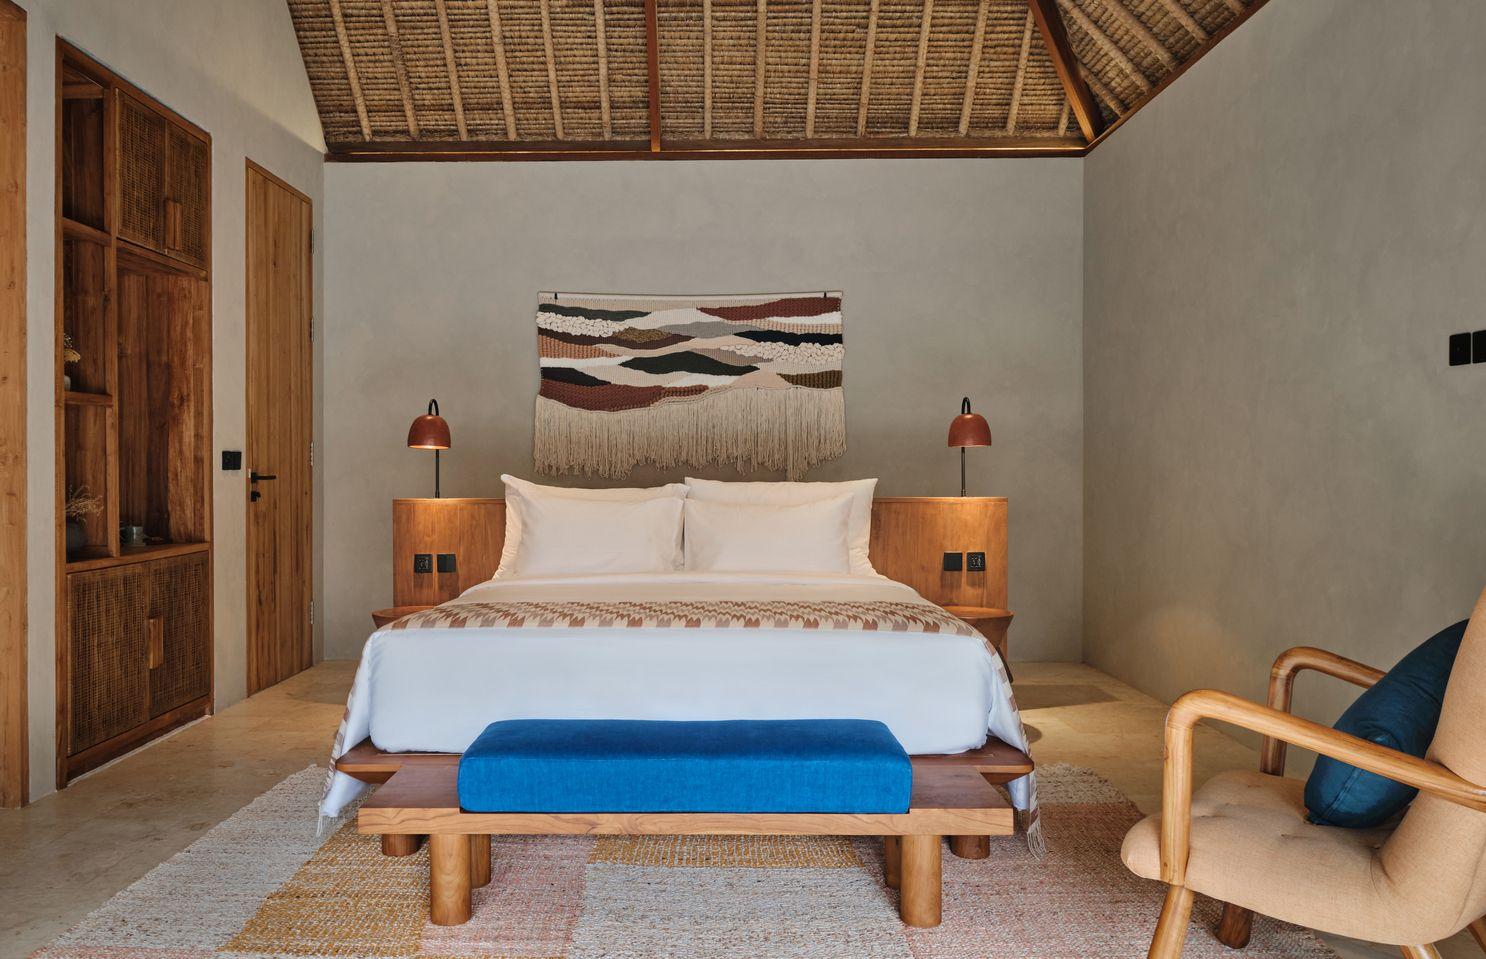 Looking into the bungalow at the spacious modern design of bungalow rooms at Boni Beach Lombok.